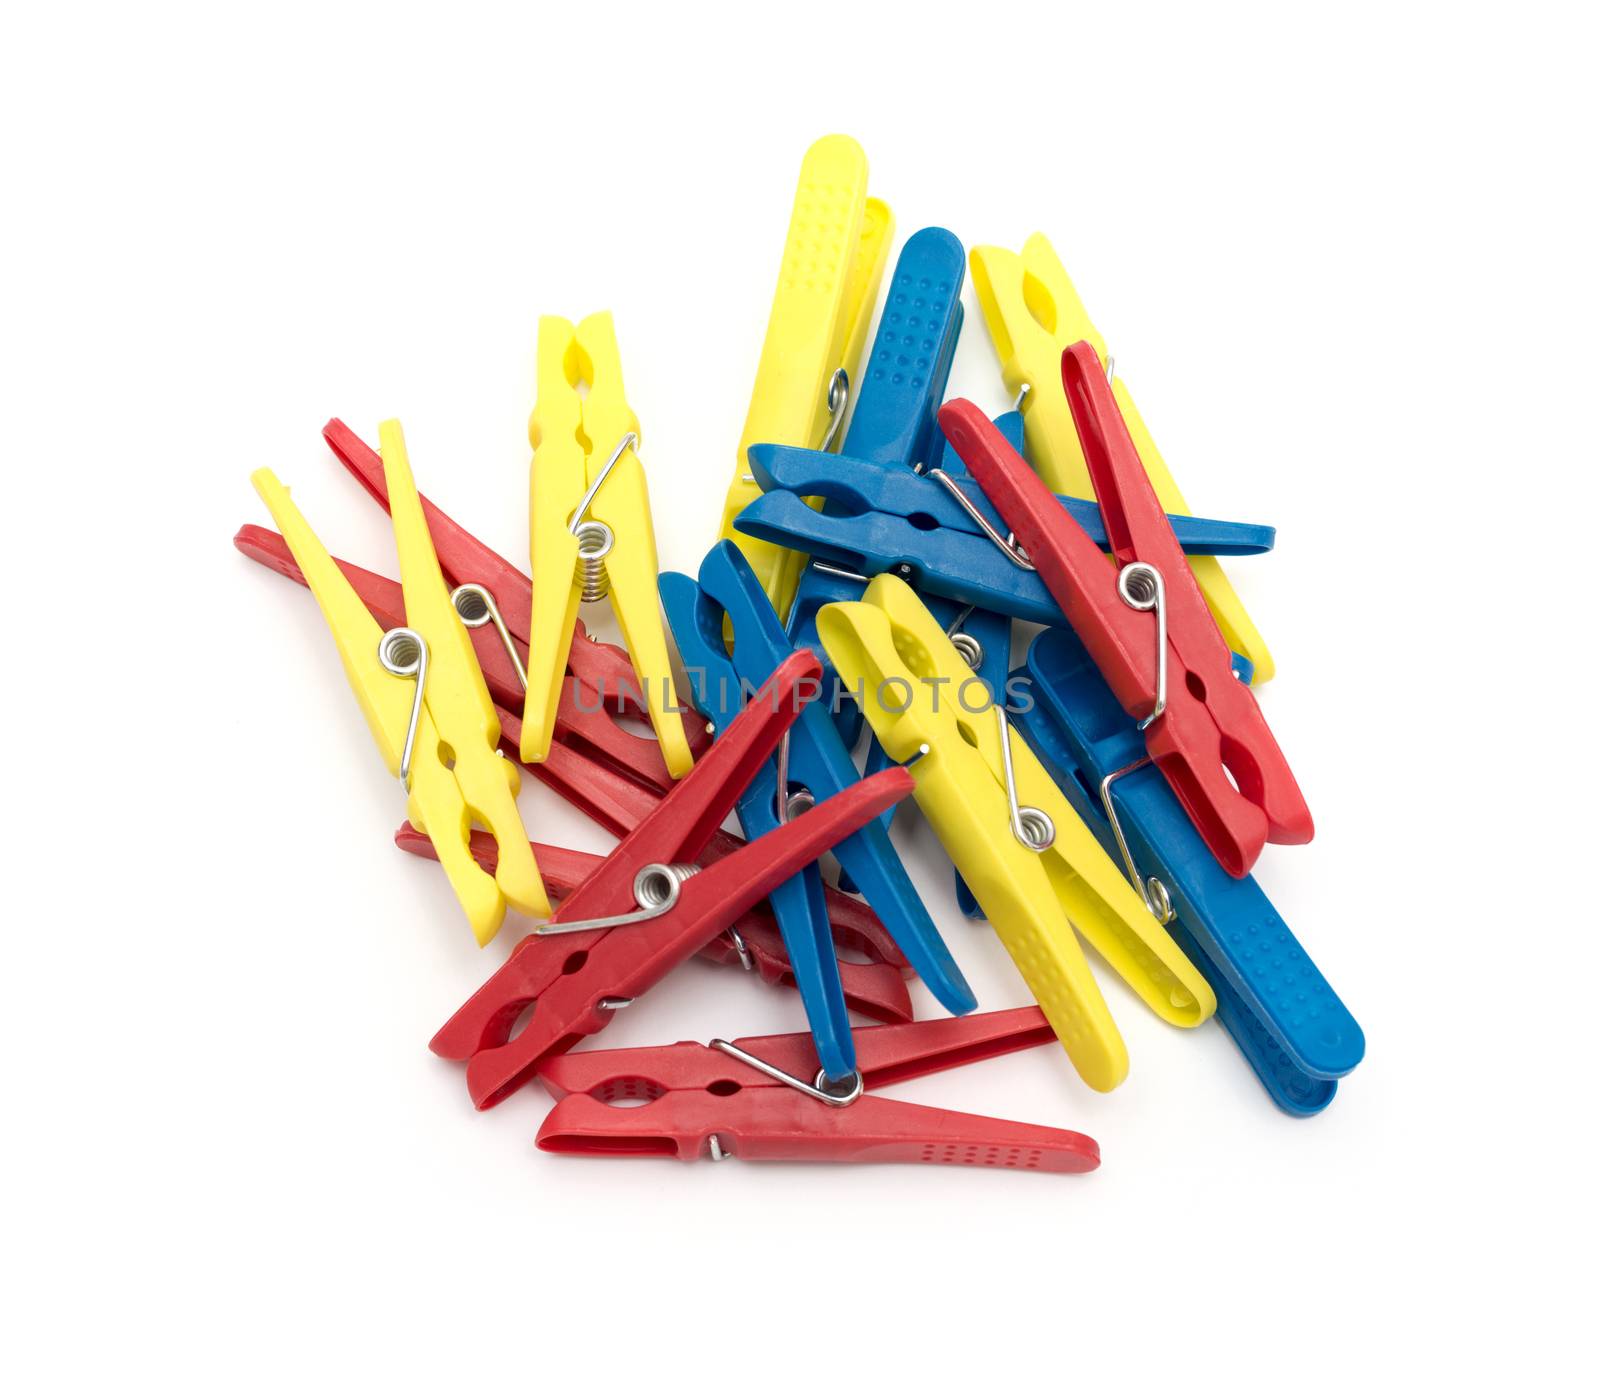 Multicoloured plastic clothes pegs on a white background by DNKSTUDIO